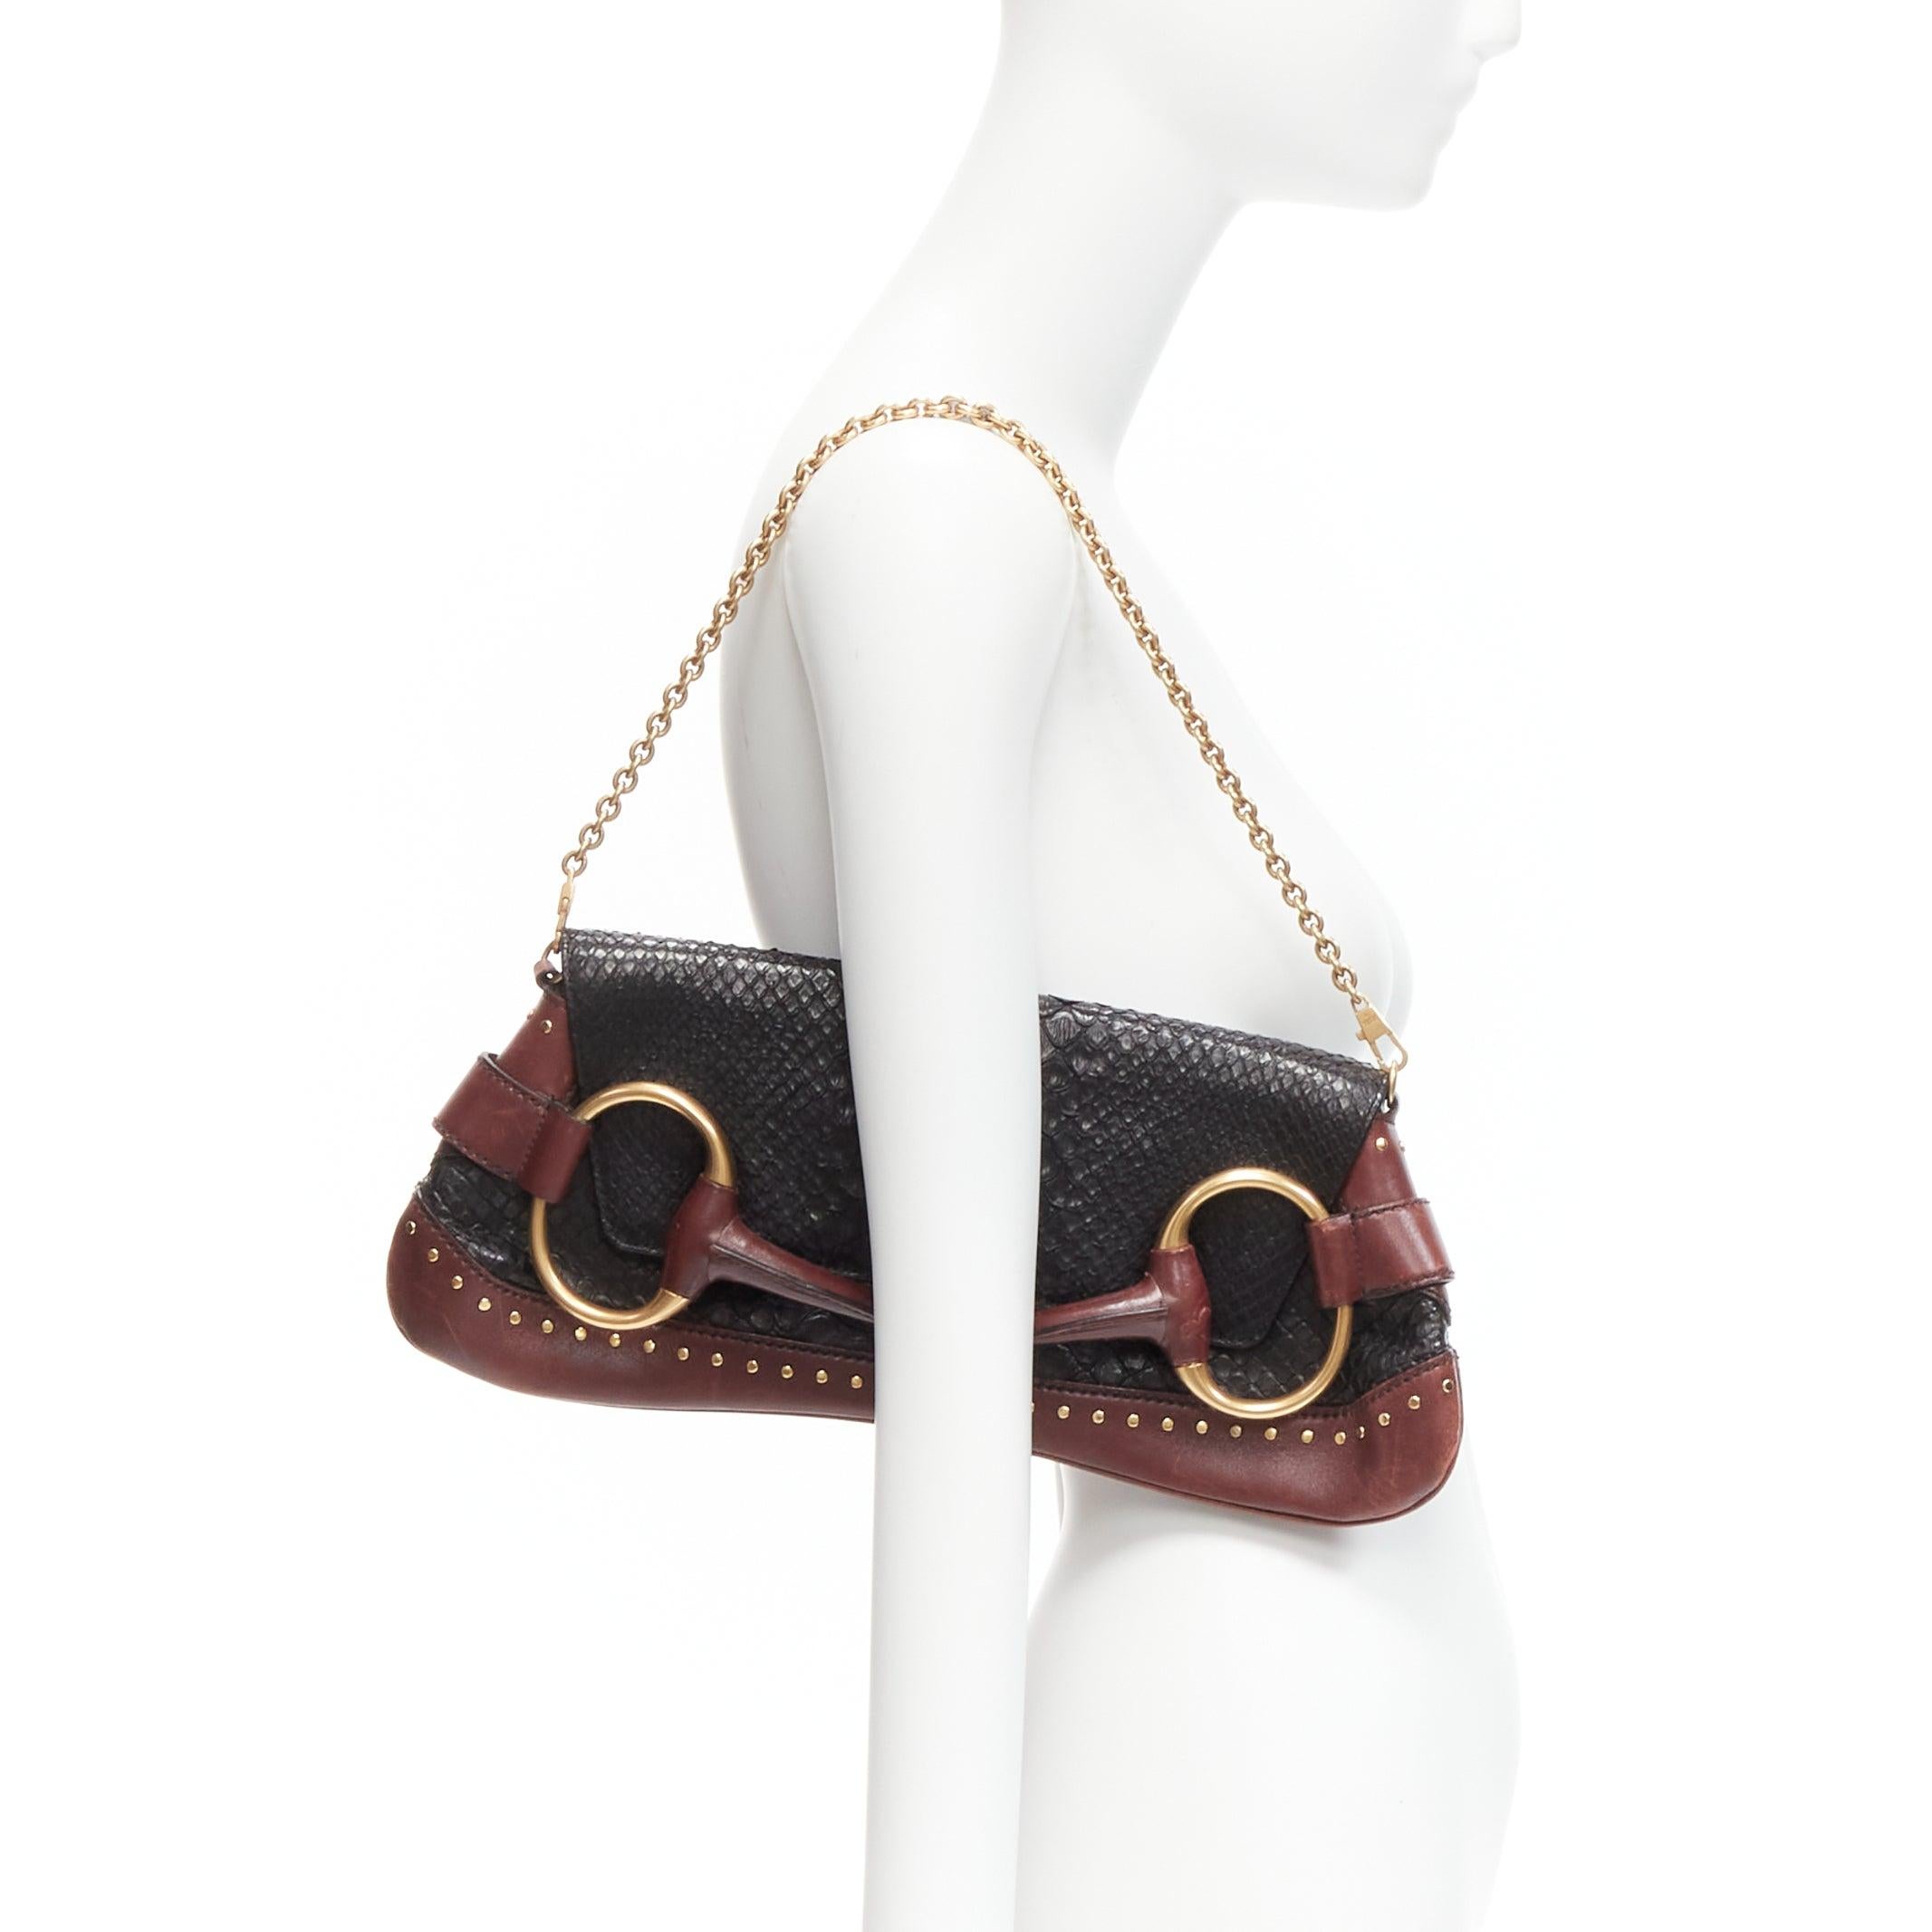 GUCCI Tom Ford Vintage Horsebit black scaled leather gold buckle shoulder chain clutch bag
Reference: GIYG/A00306
Brand: Gucci
Designer: Tom Ford
Collection: Runway
Material: Leather, Metal
Color: Black, Burgundy
Pattern: Solid
Closure: Snap